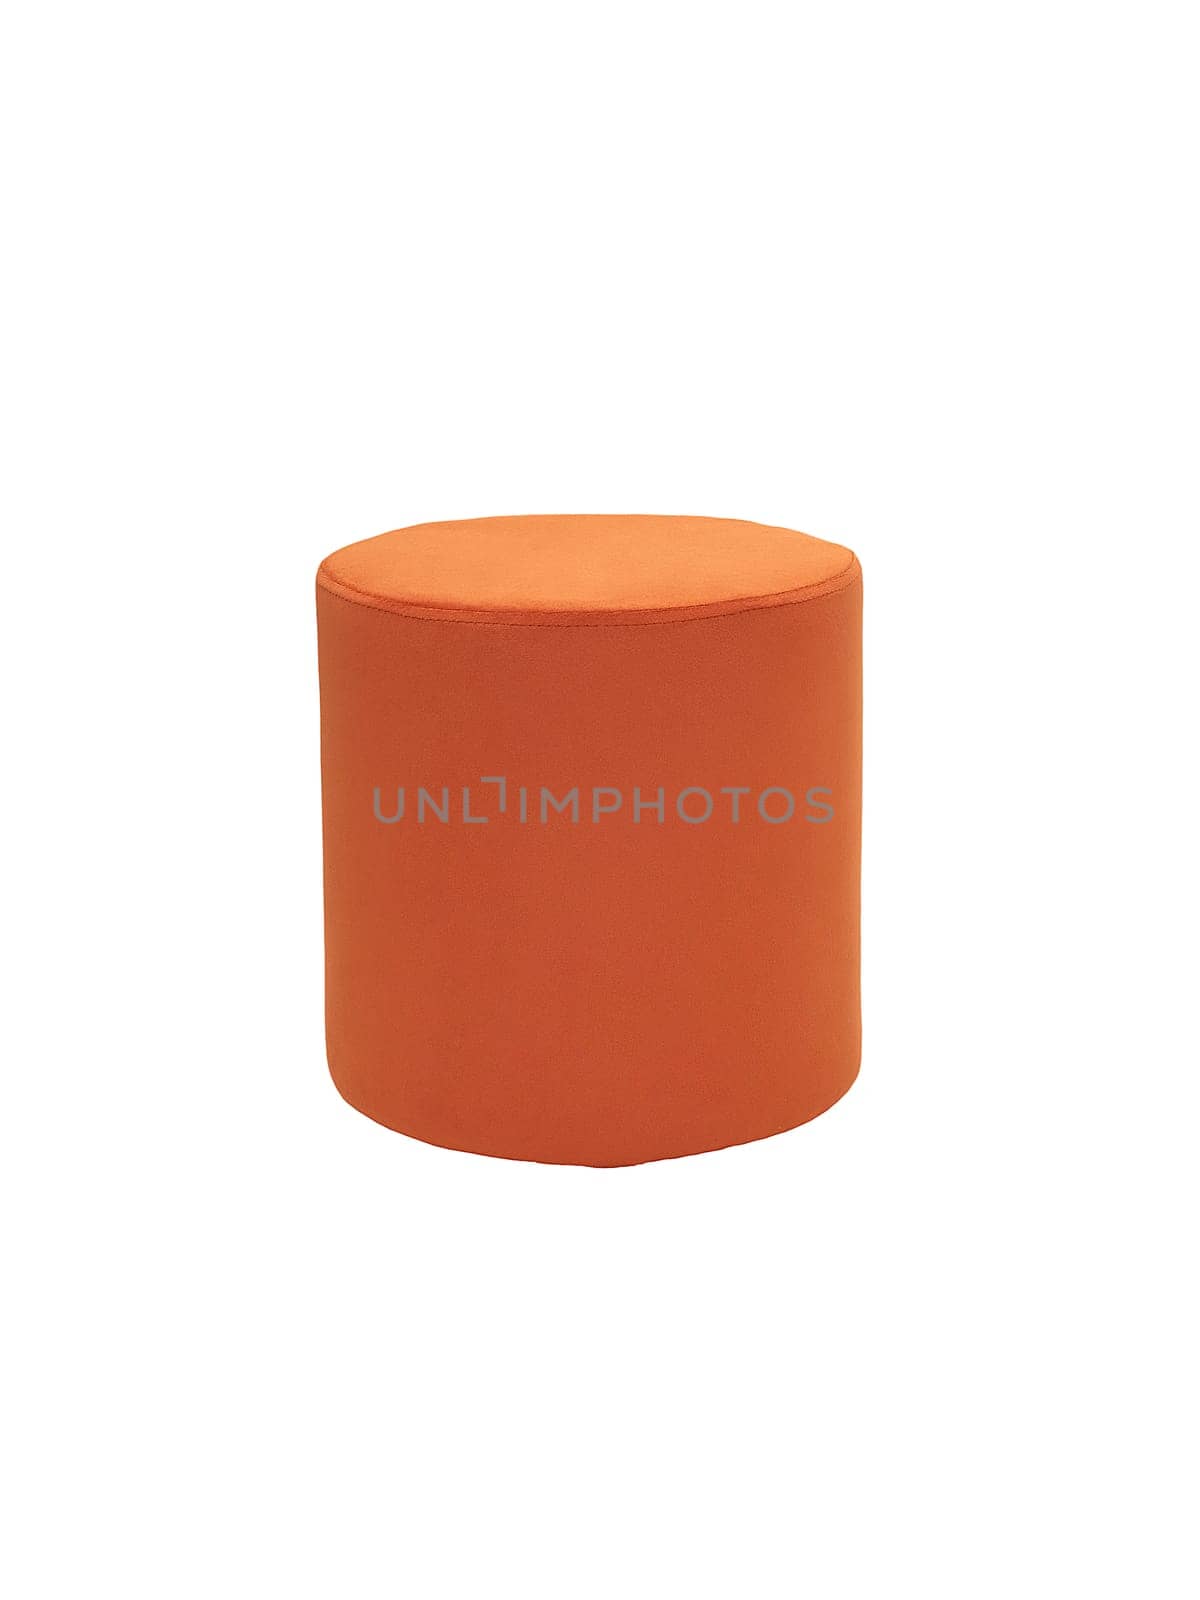 unusual modern orange cylindrical padded stool upholstered with soft fabric in strict style isolated on white background. Creative approach to making furniture in shape of cylinder